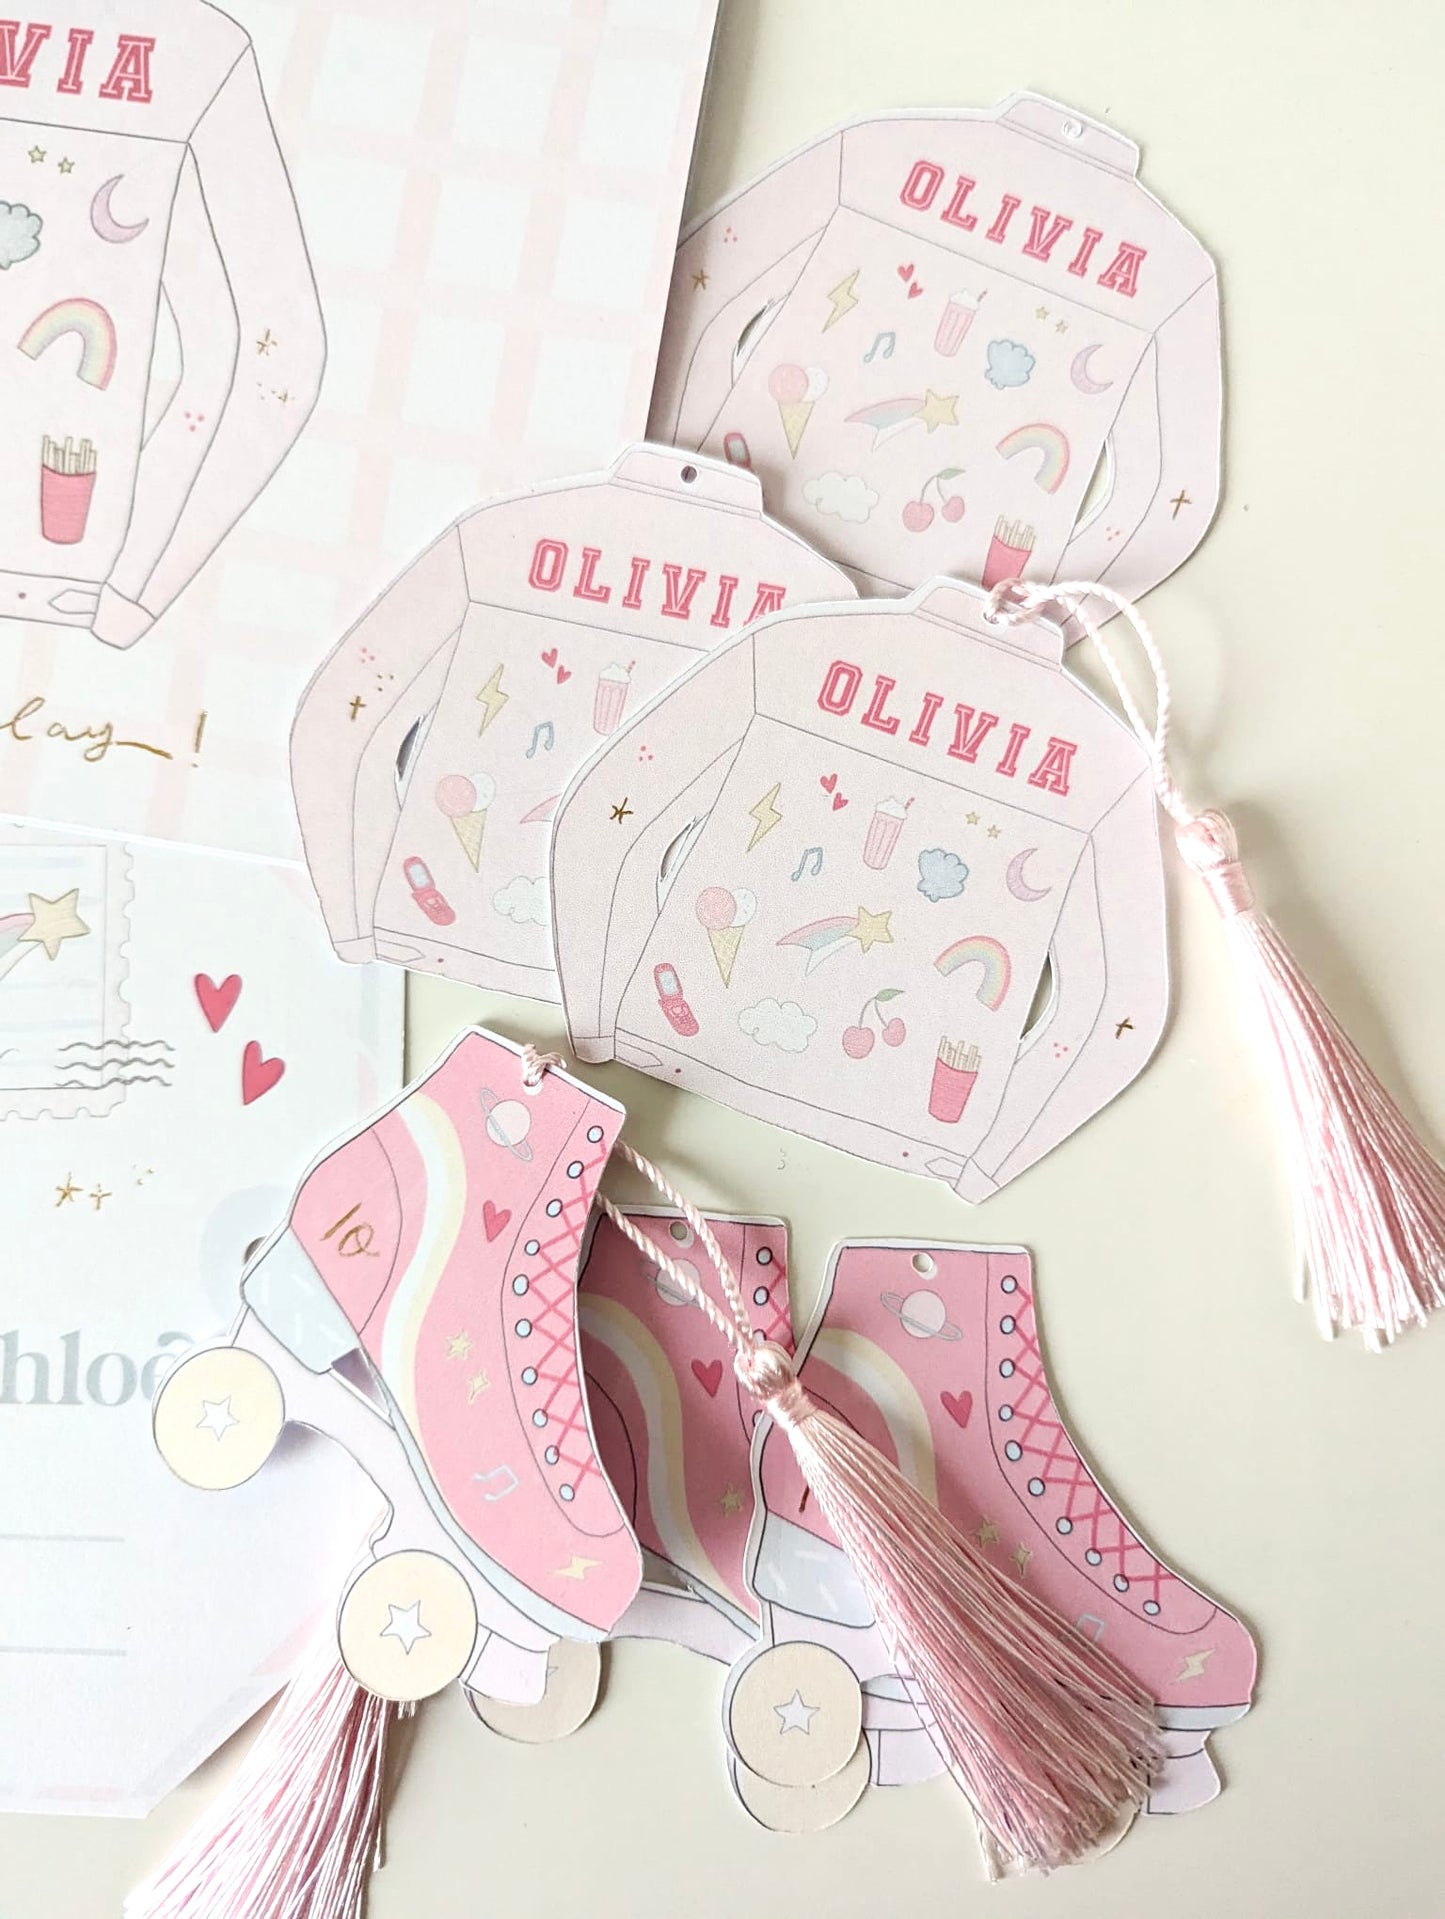 Set of 6 girly pink birthday gift tags - denim jacket & roller blade gold foil with silk navy tassel